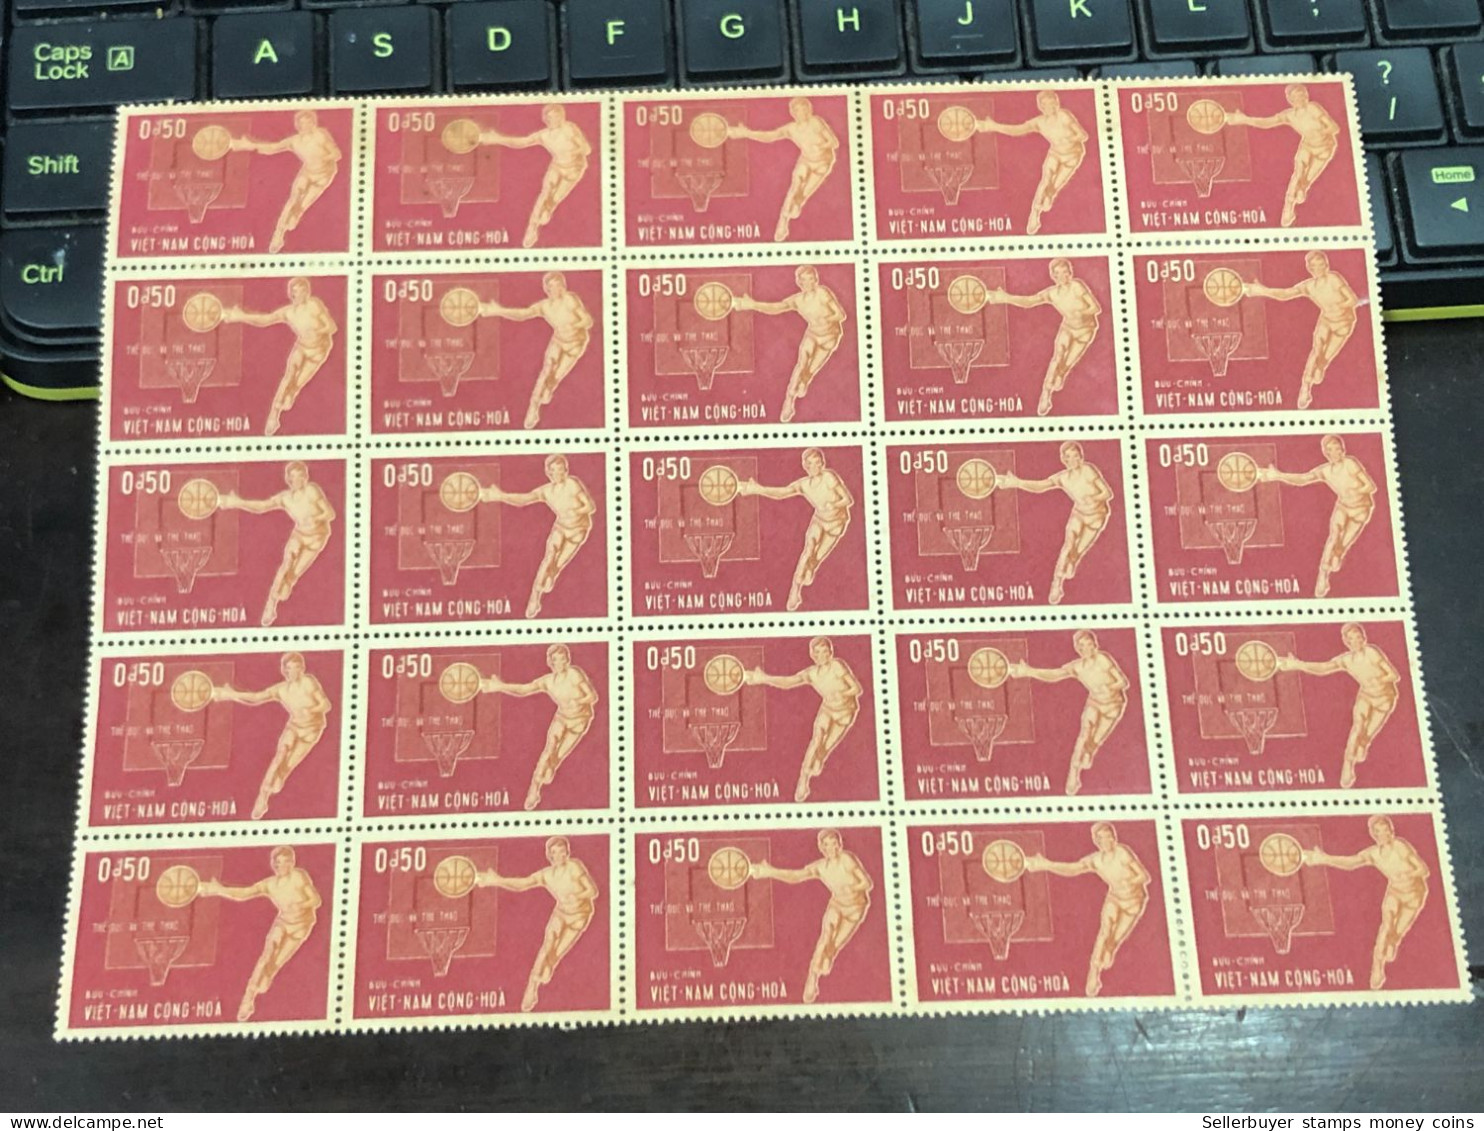 Vietnam South Sheet Stamps Before 1975(0$ 50 Physical Culture1965) 1 Pcs25 Stamps Quality Good - Vietnam